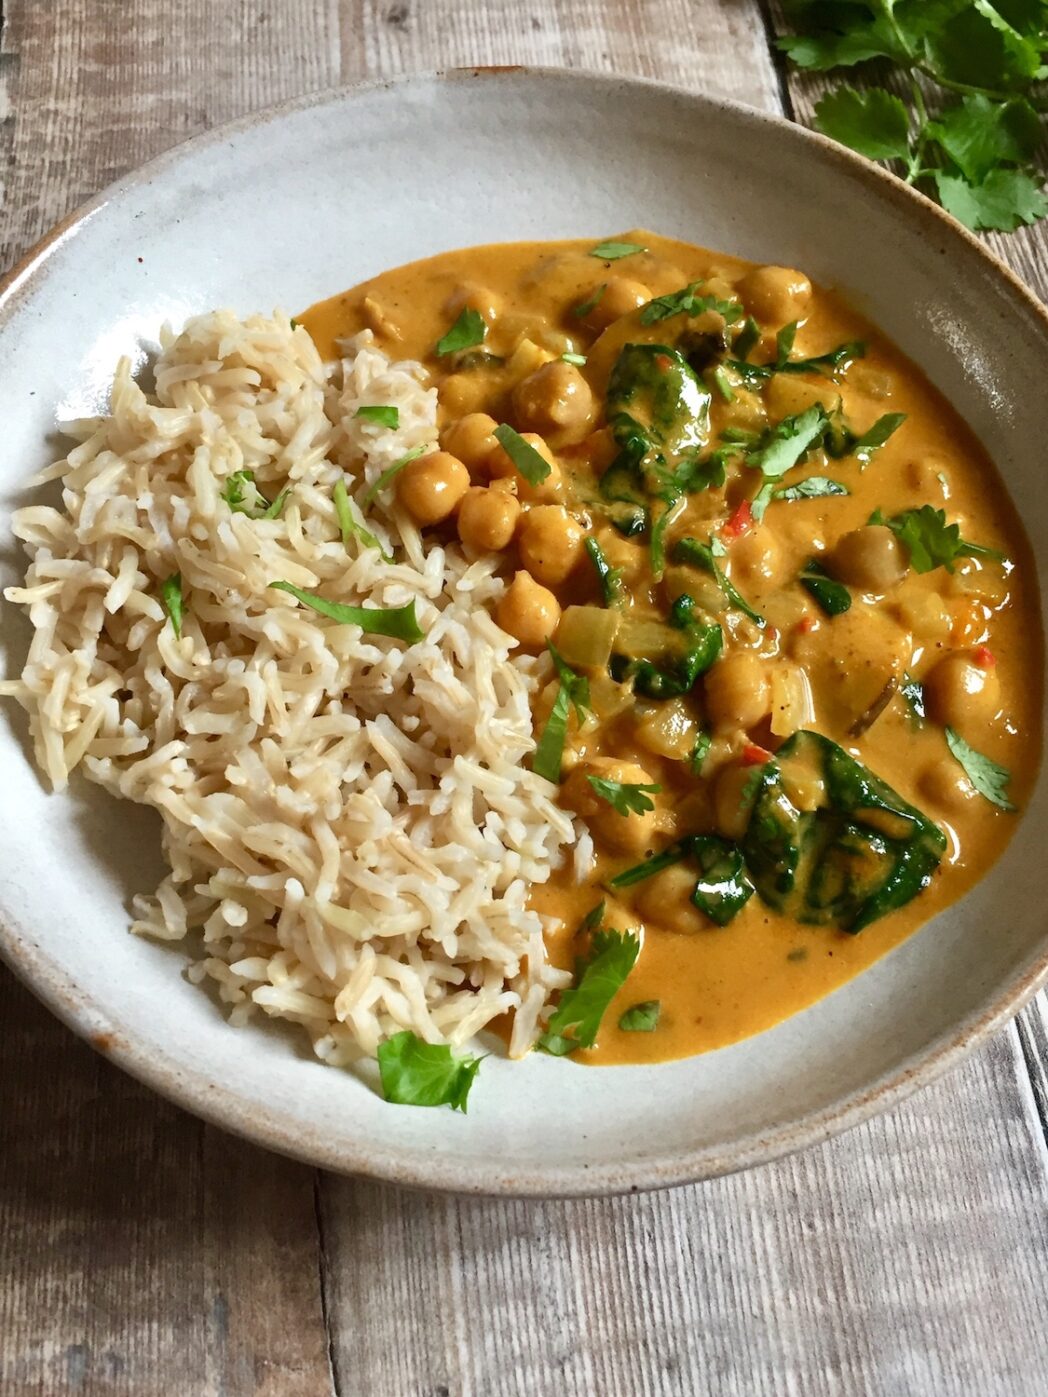 Easy Chickpea, Mushroom & Spinach Curry Recipe - keep it simpElle